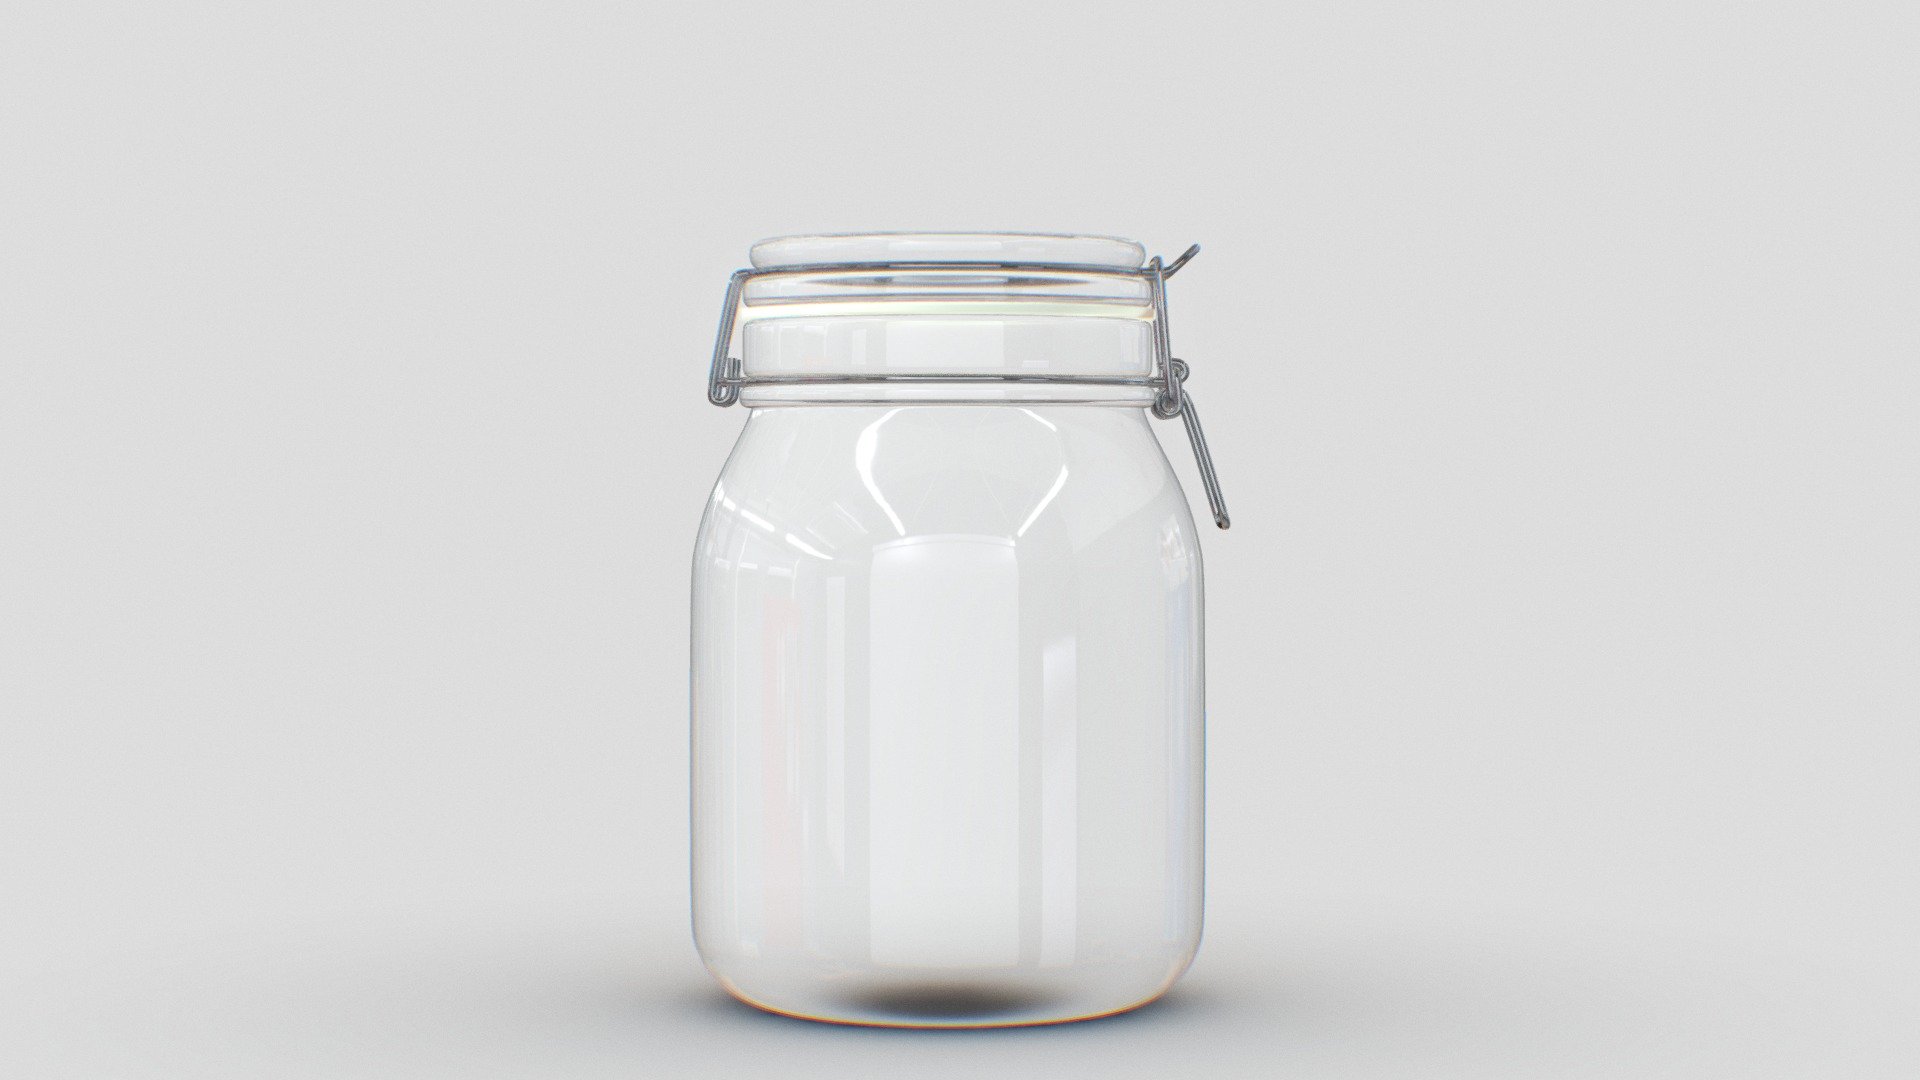 IKEA Korken Jar (34 oz)

This model I made it with Blender. I made it with actual size reference.
I include some file format (exported from Blender), some sample render and also I include the lighting setup on the Blender file. 
Hopefully you enjoy it. 
Or, you can edit my model with your preferense easily.

Please like and share if you enjoy it 3d model